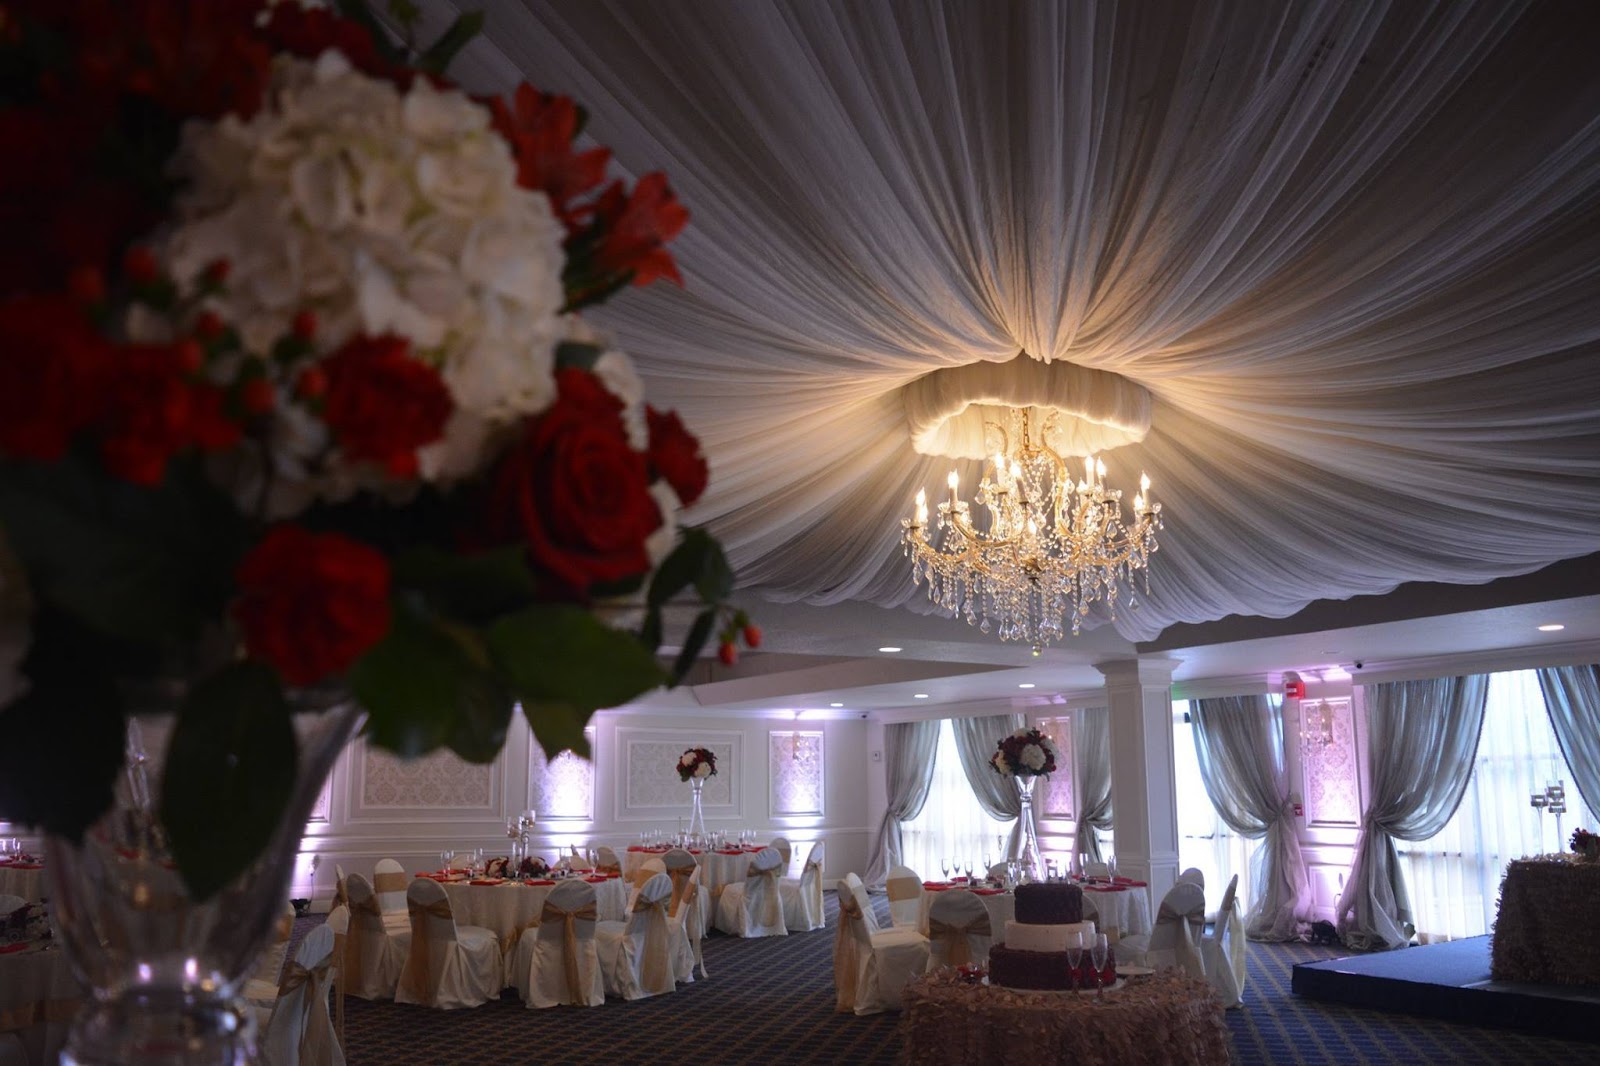 6 Reasons Why Grand Salon Is One Of The Best Wedding Venues In Miami | Blogs